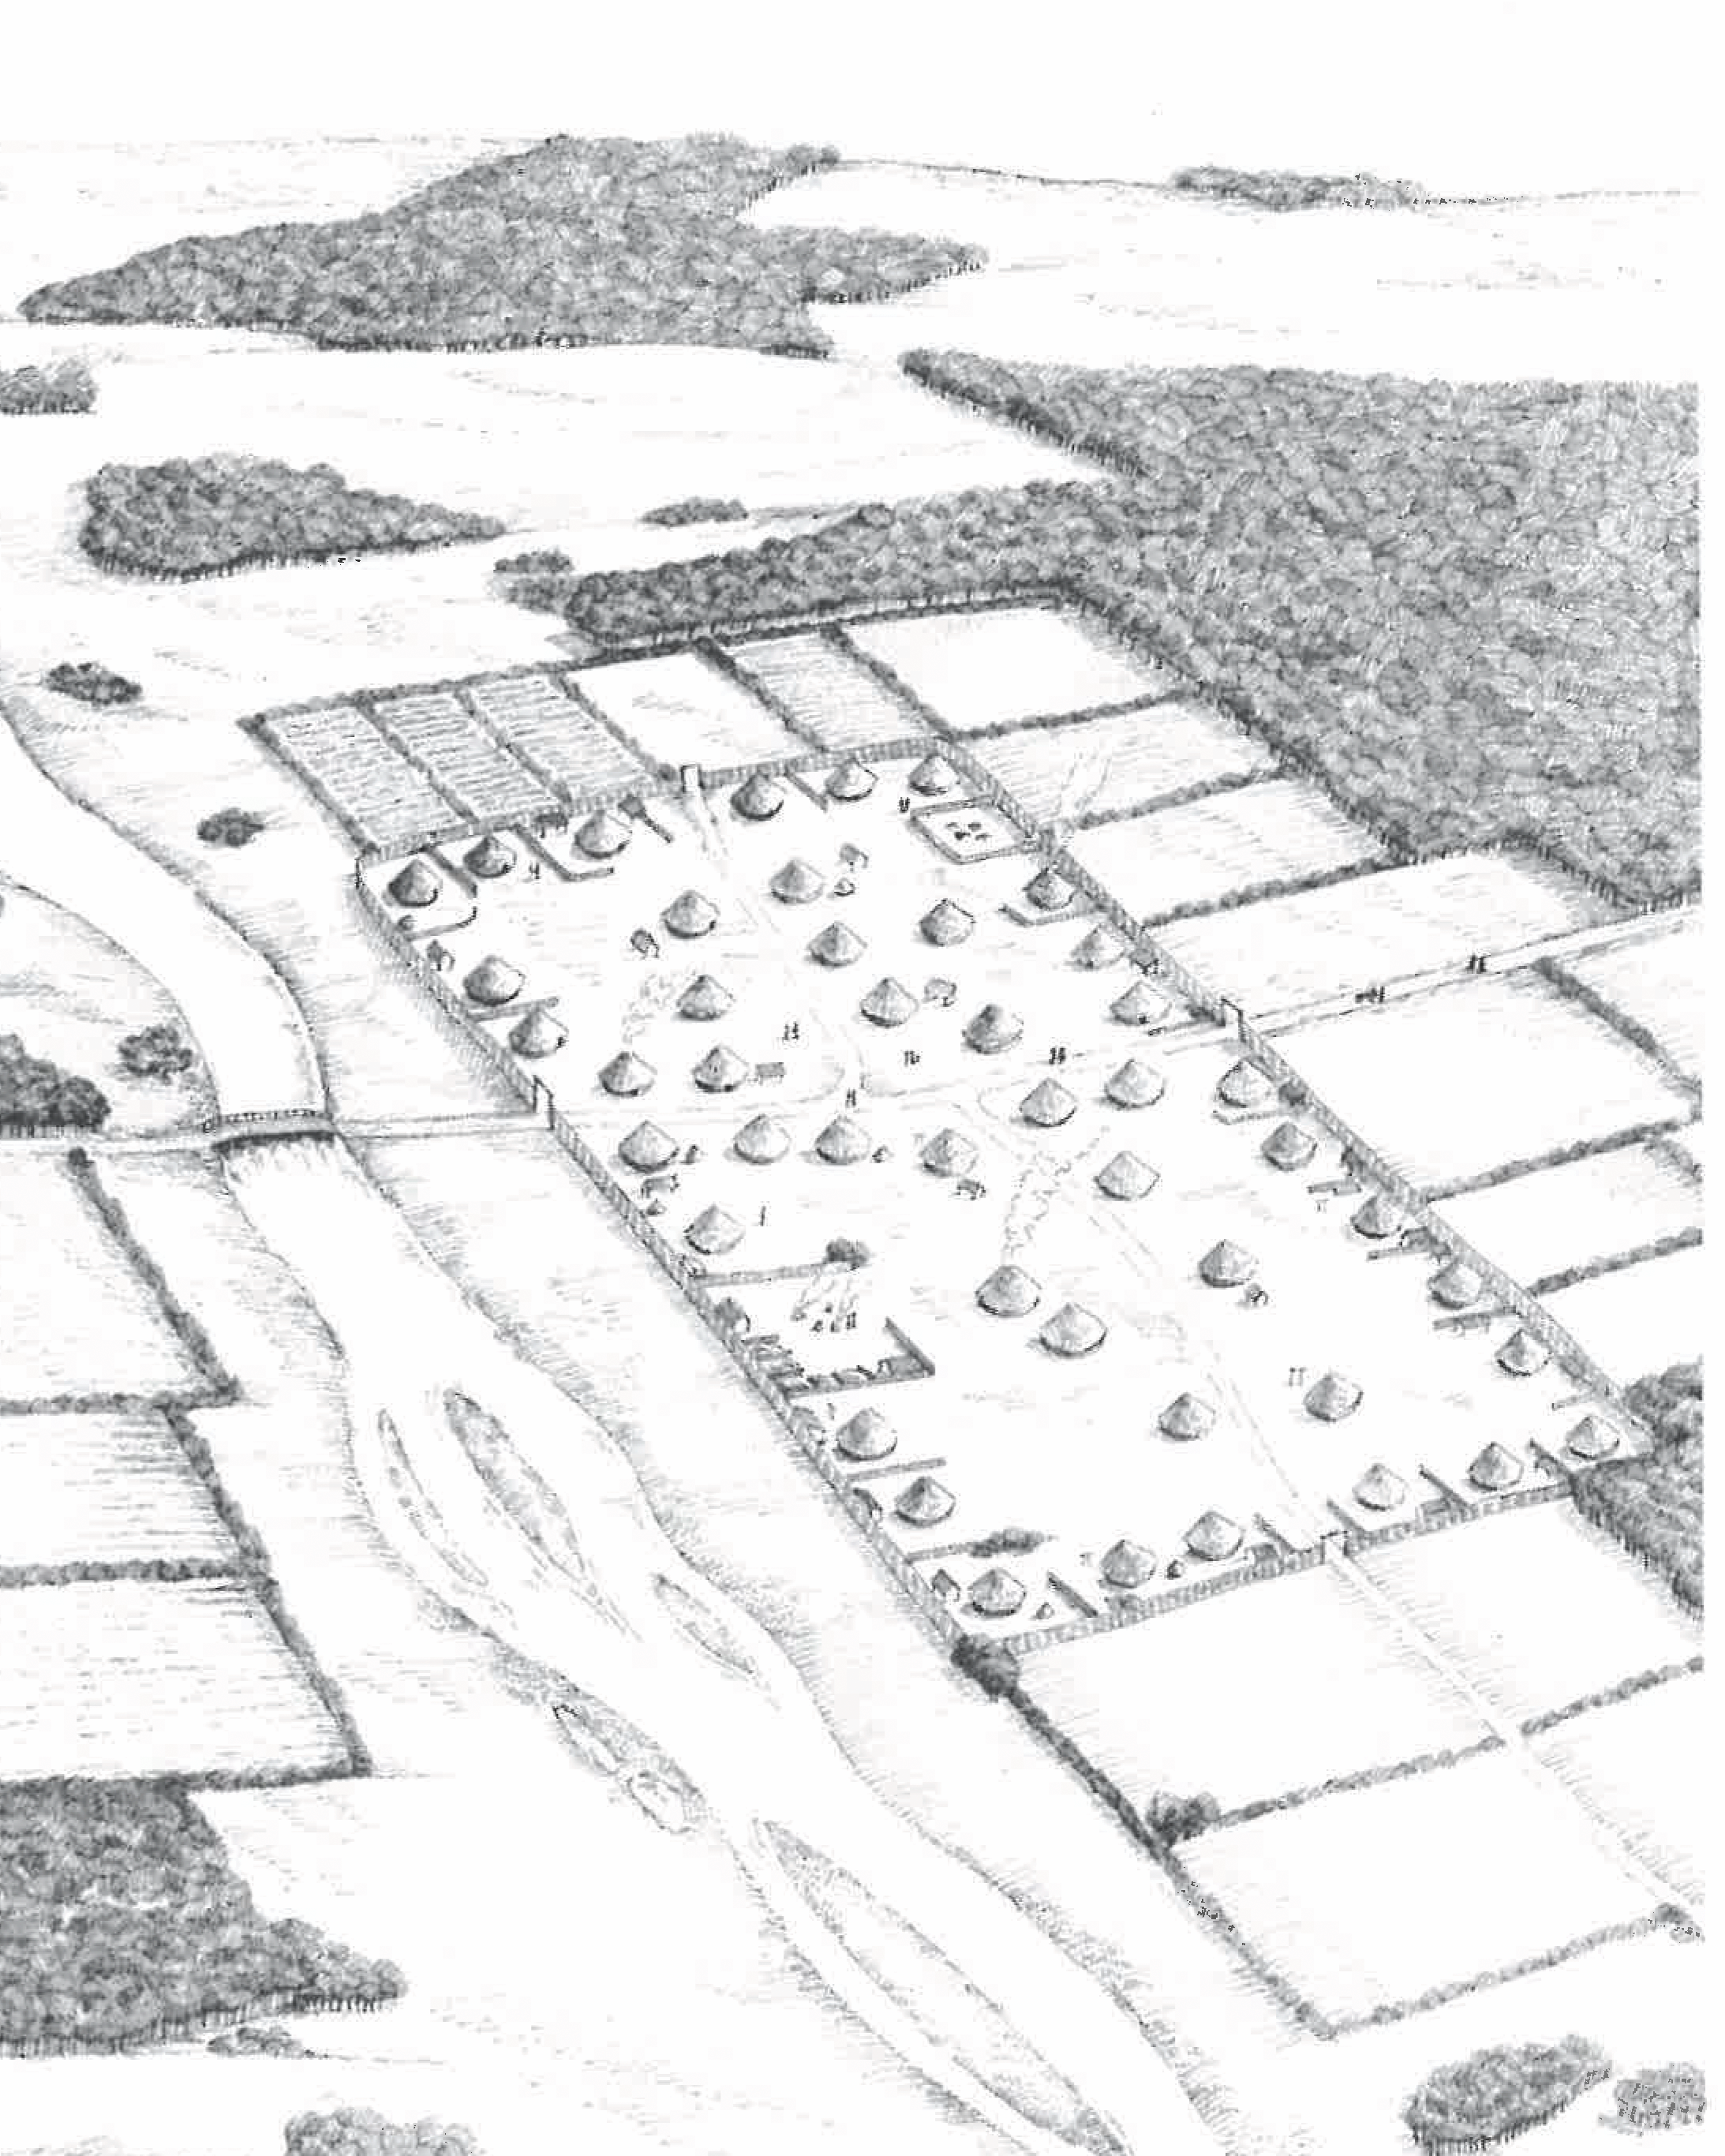 Reconstruction of Iron Age Leicester circa AD 30. Drawing by Sarah Geeves, courtesy of University of Leicester Archaeological Services.